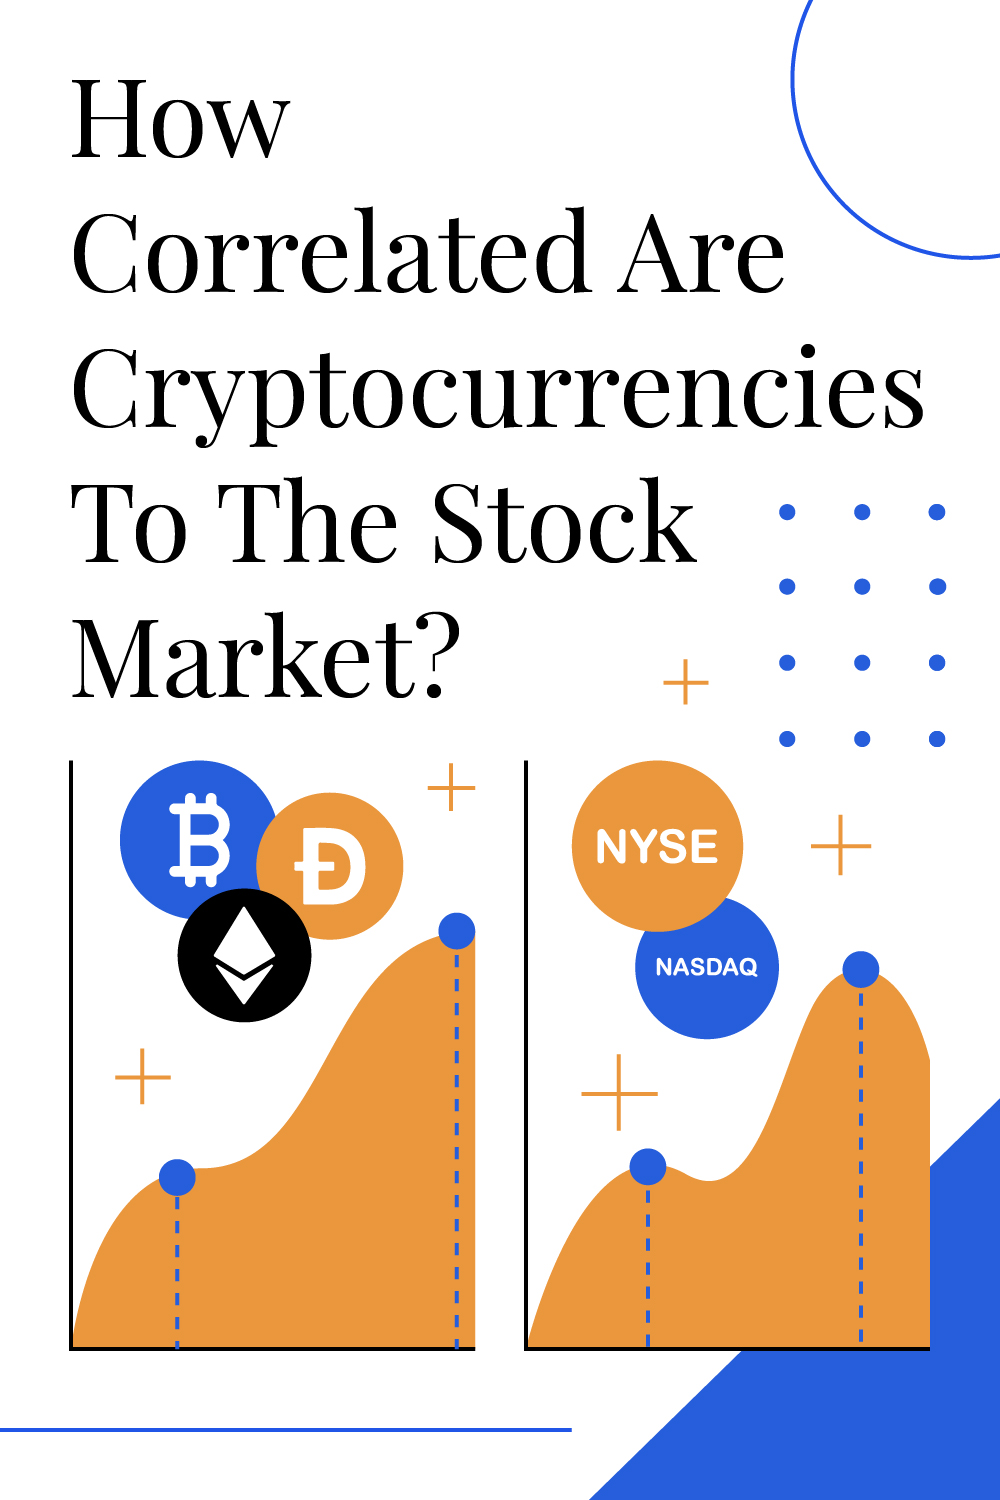 How Correlated Are Cryptocurrencies To The Stock Market?